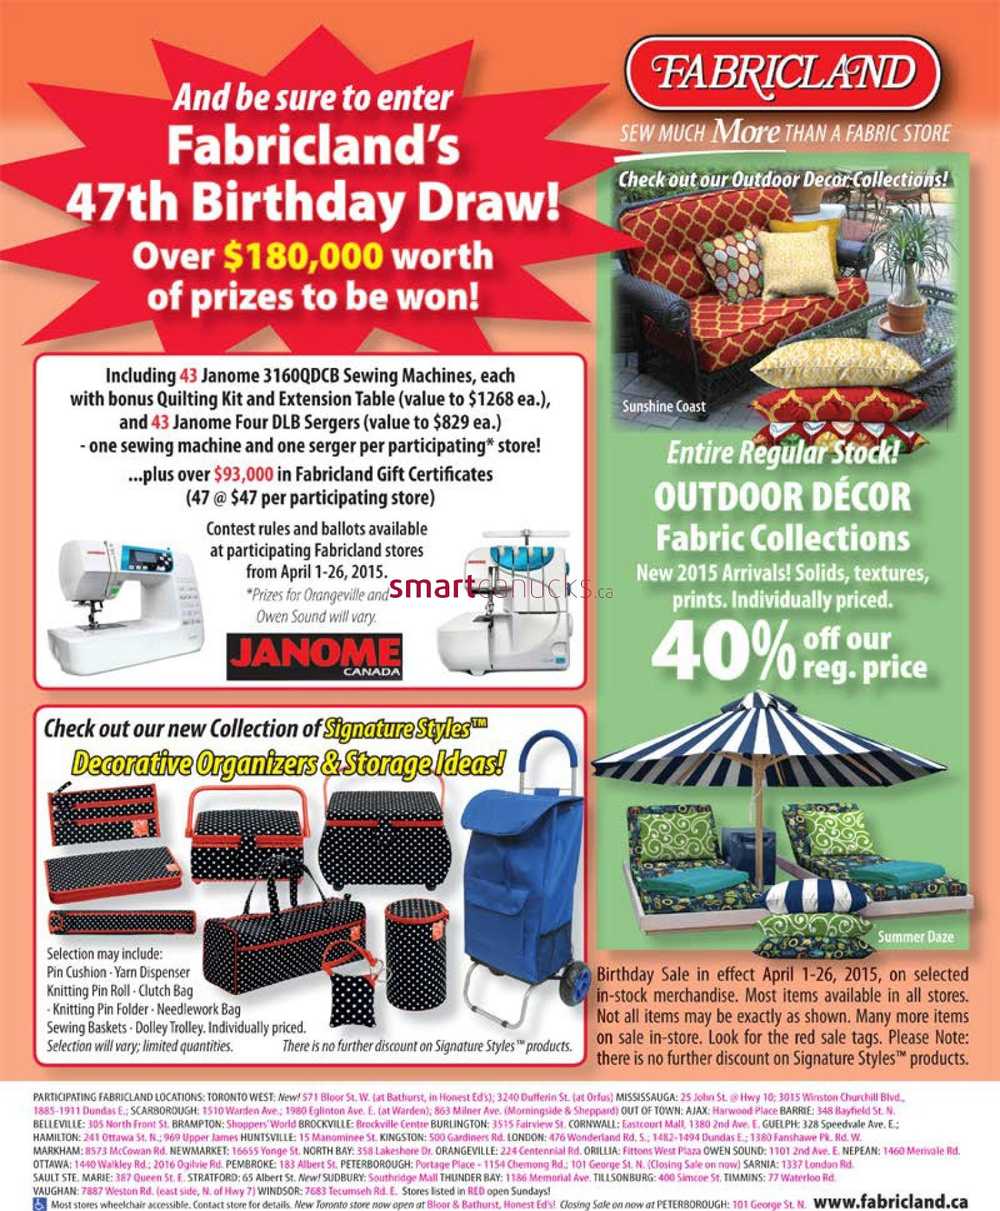 What does Fabricland in Canada sell?